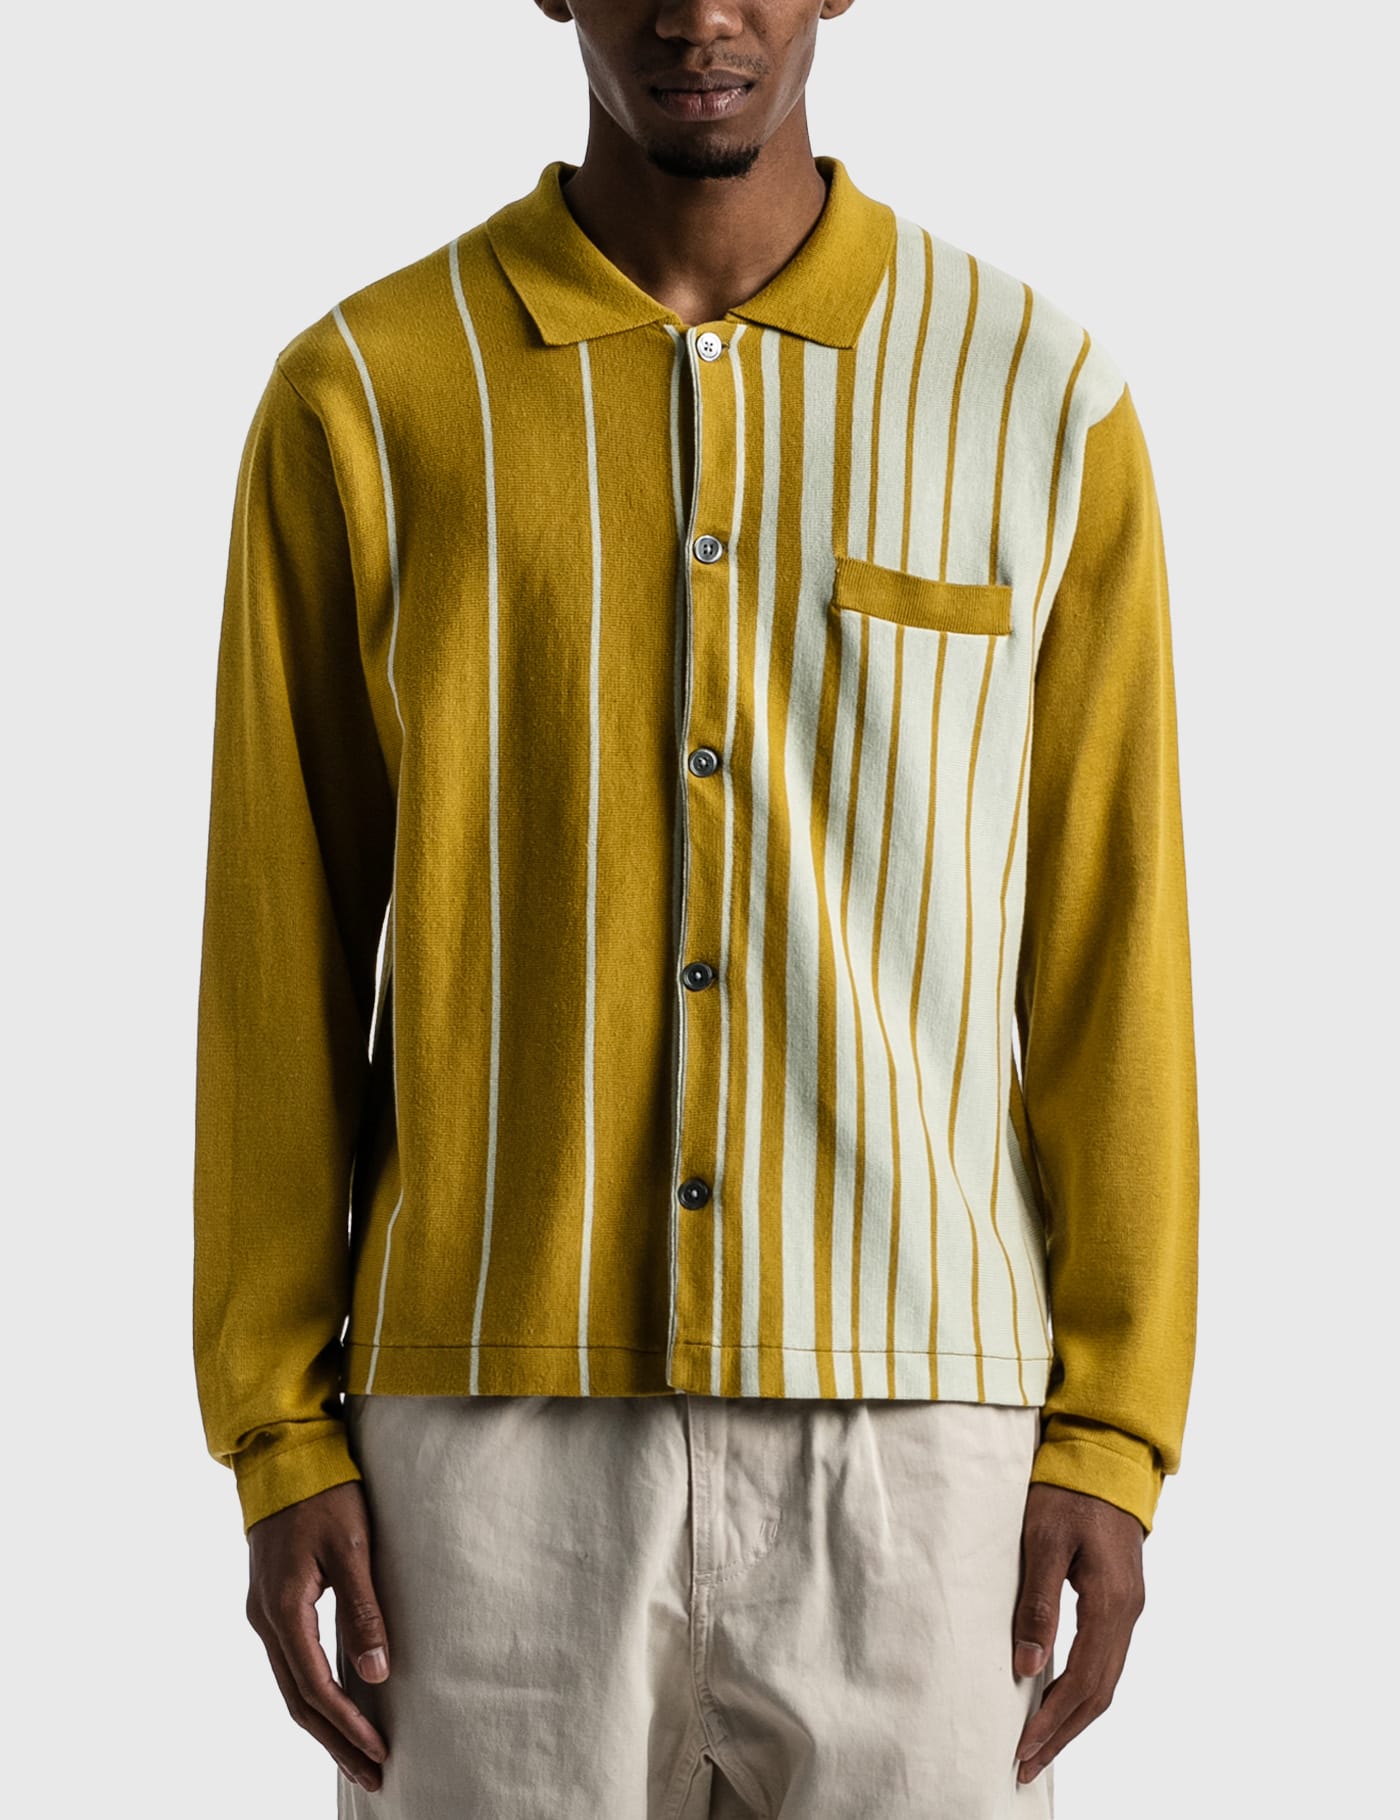 Stüssy - Striped Knit Shirt | HBX - Globally Curated Fashion and